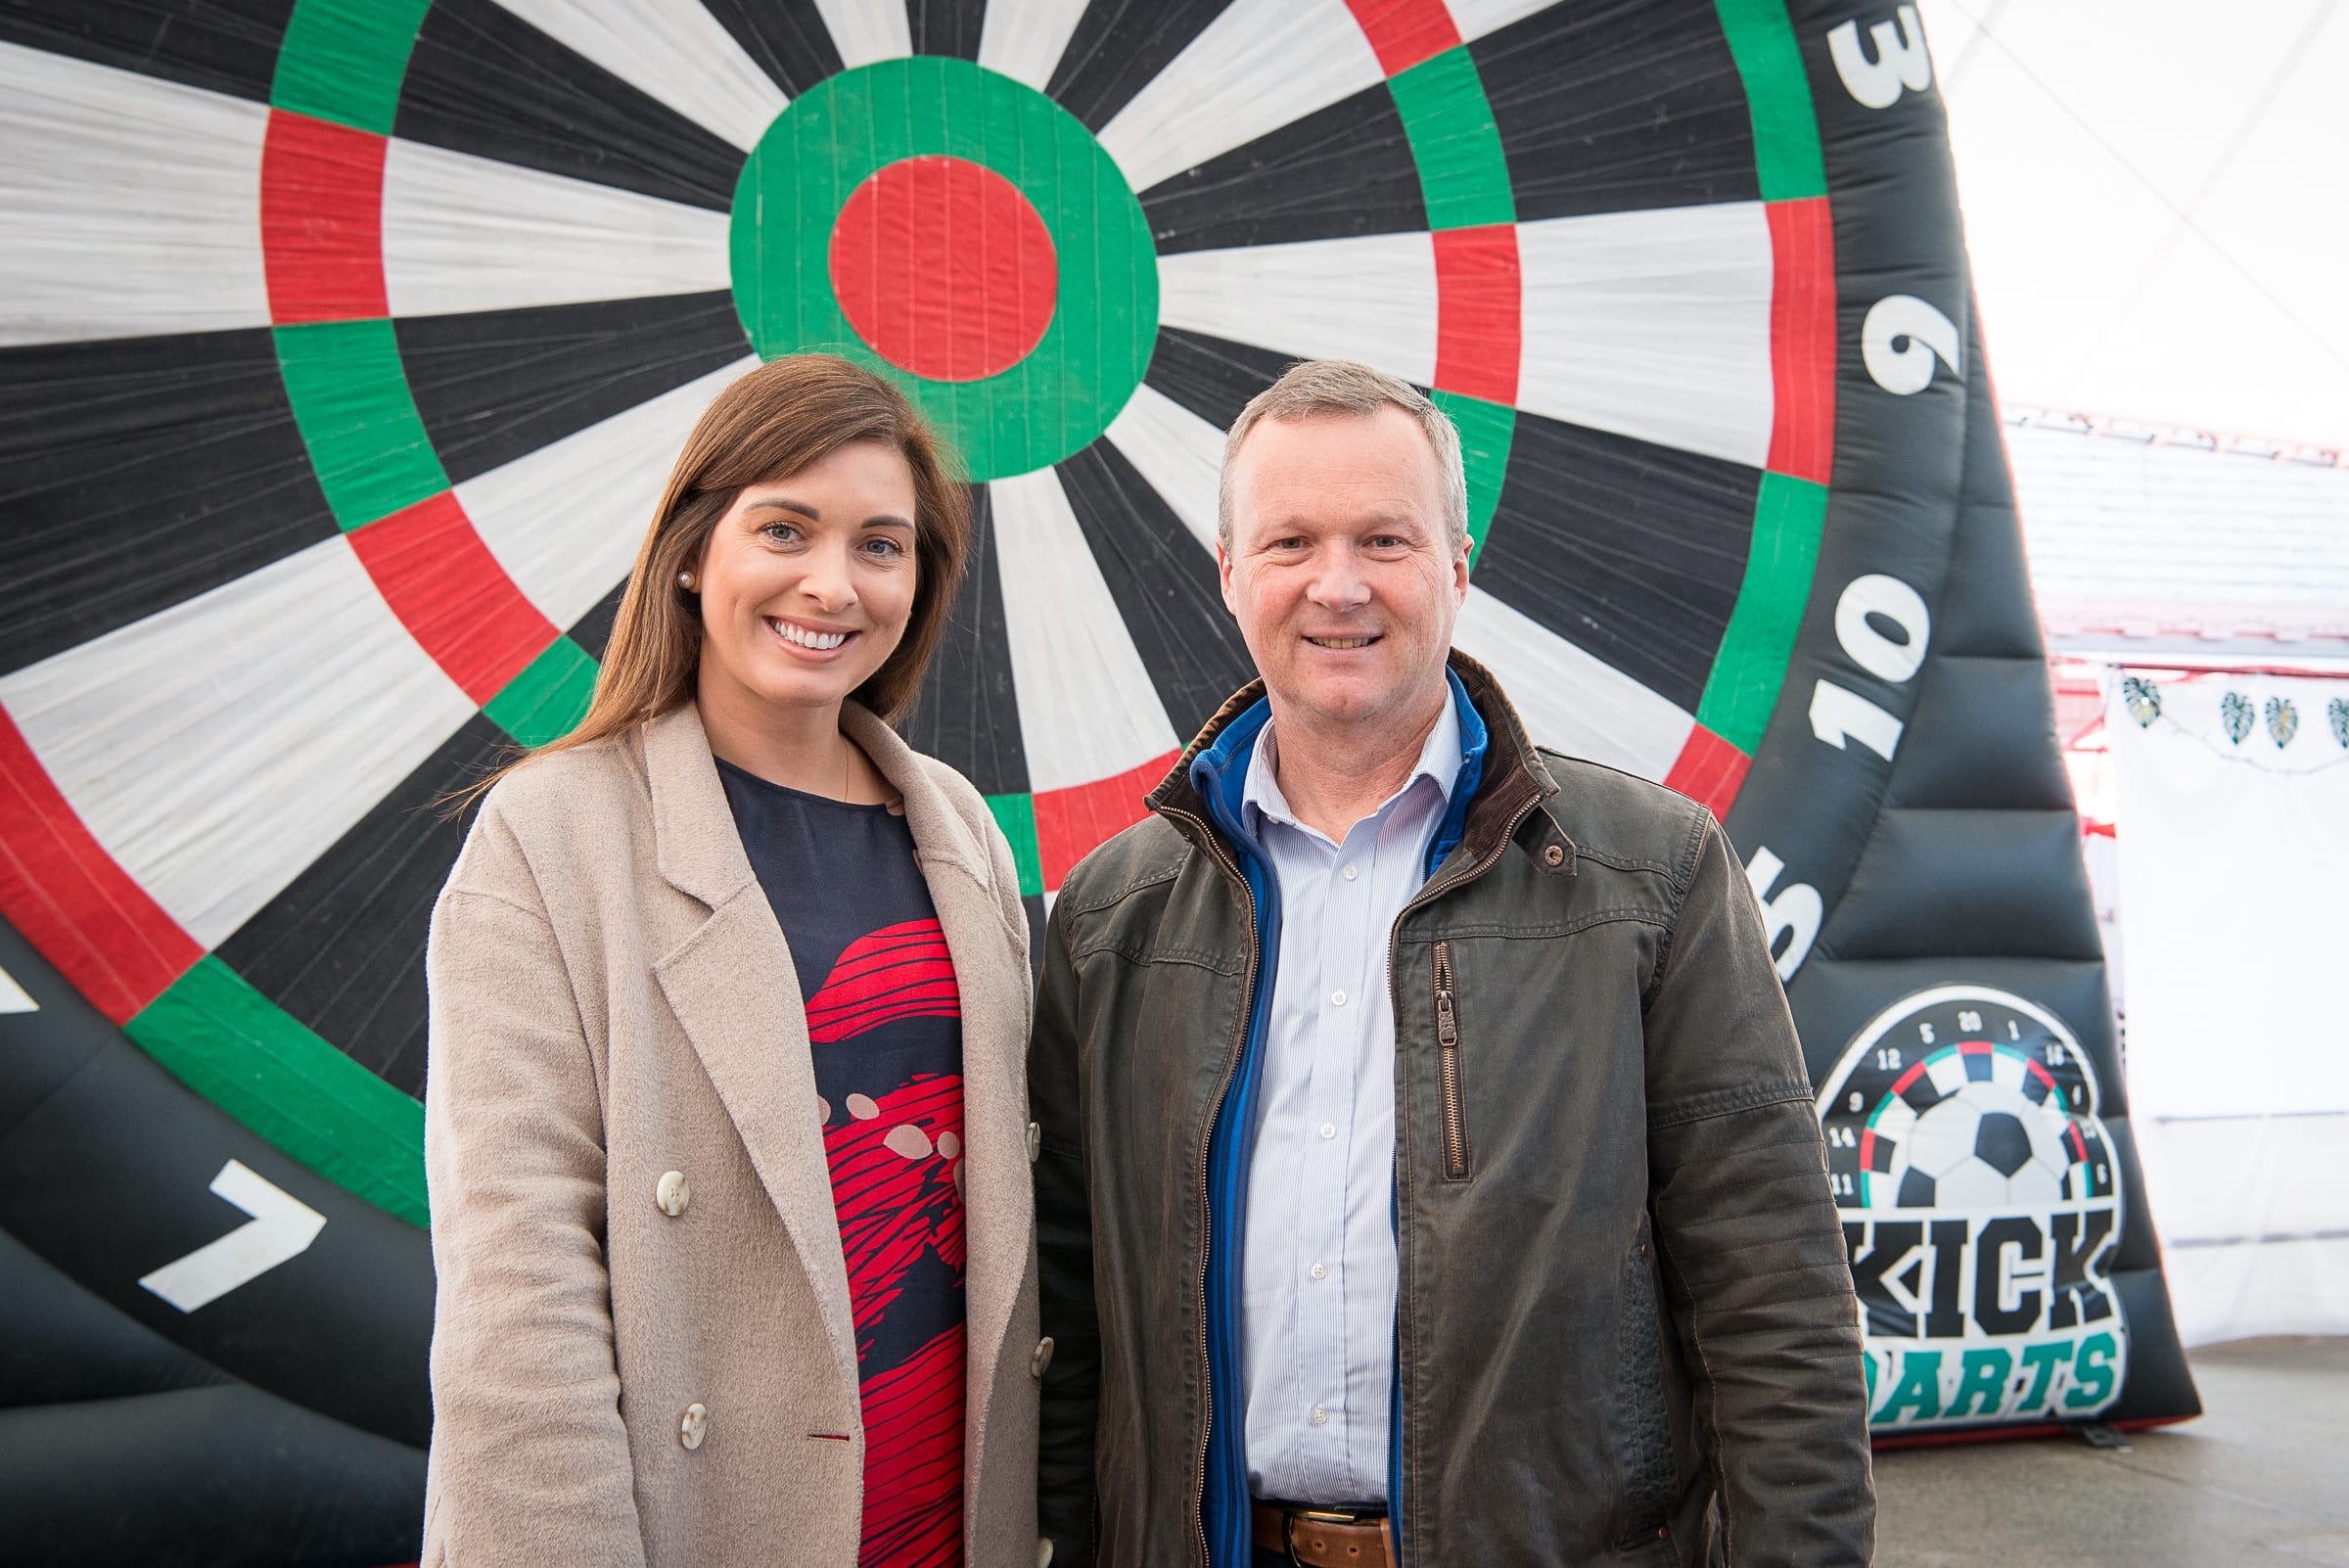 From Left to Right:  Regional Leaders BBQ which took place on the 6th June in the Limerick Milk Market: Deirdre Geaney - IQEQ, Paul Griffin - First Compliance. 
Photo by Morning Star Photography